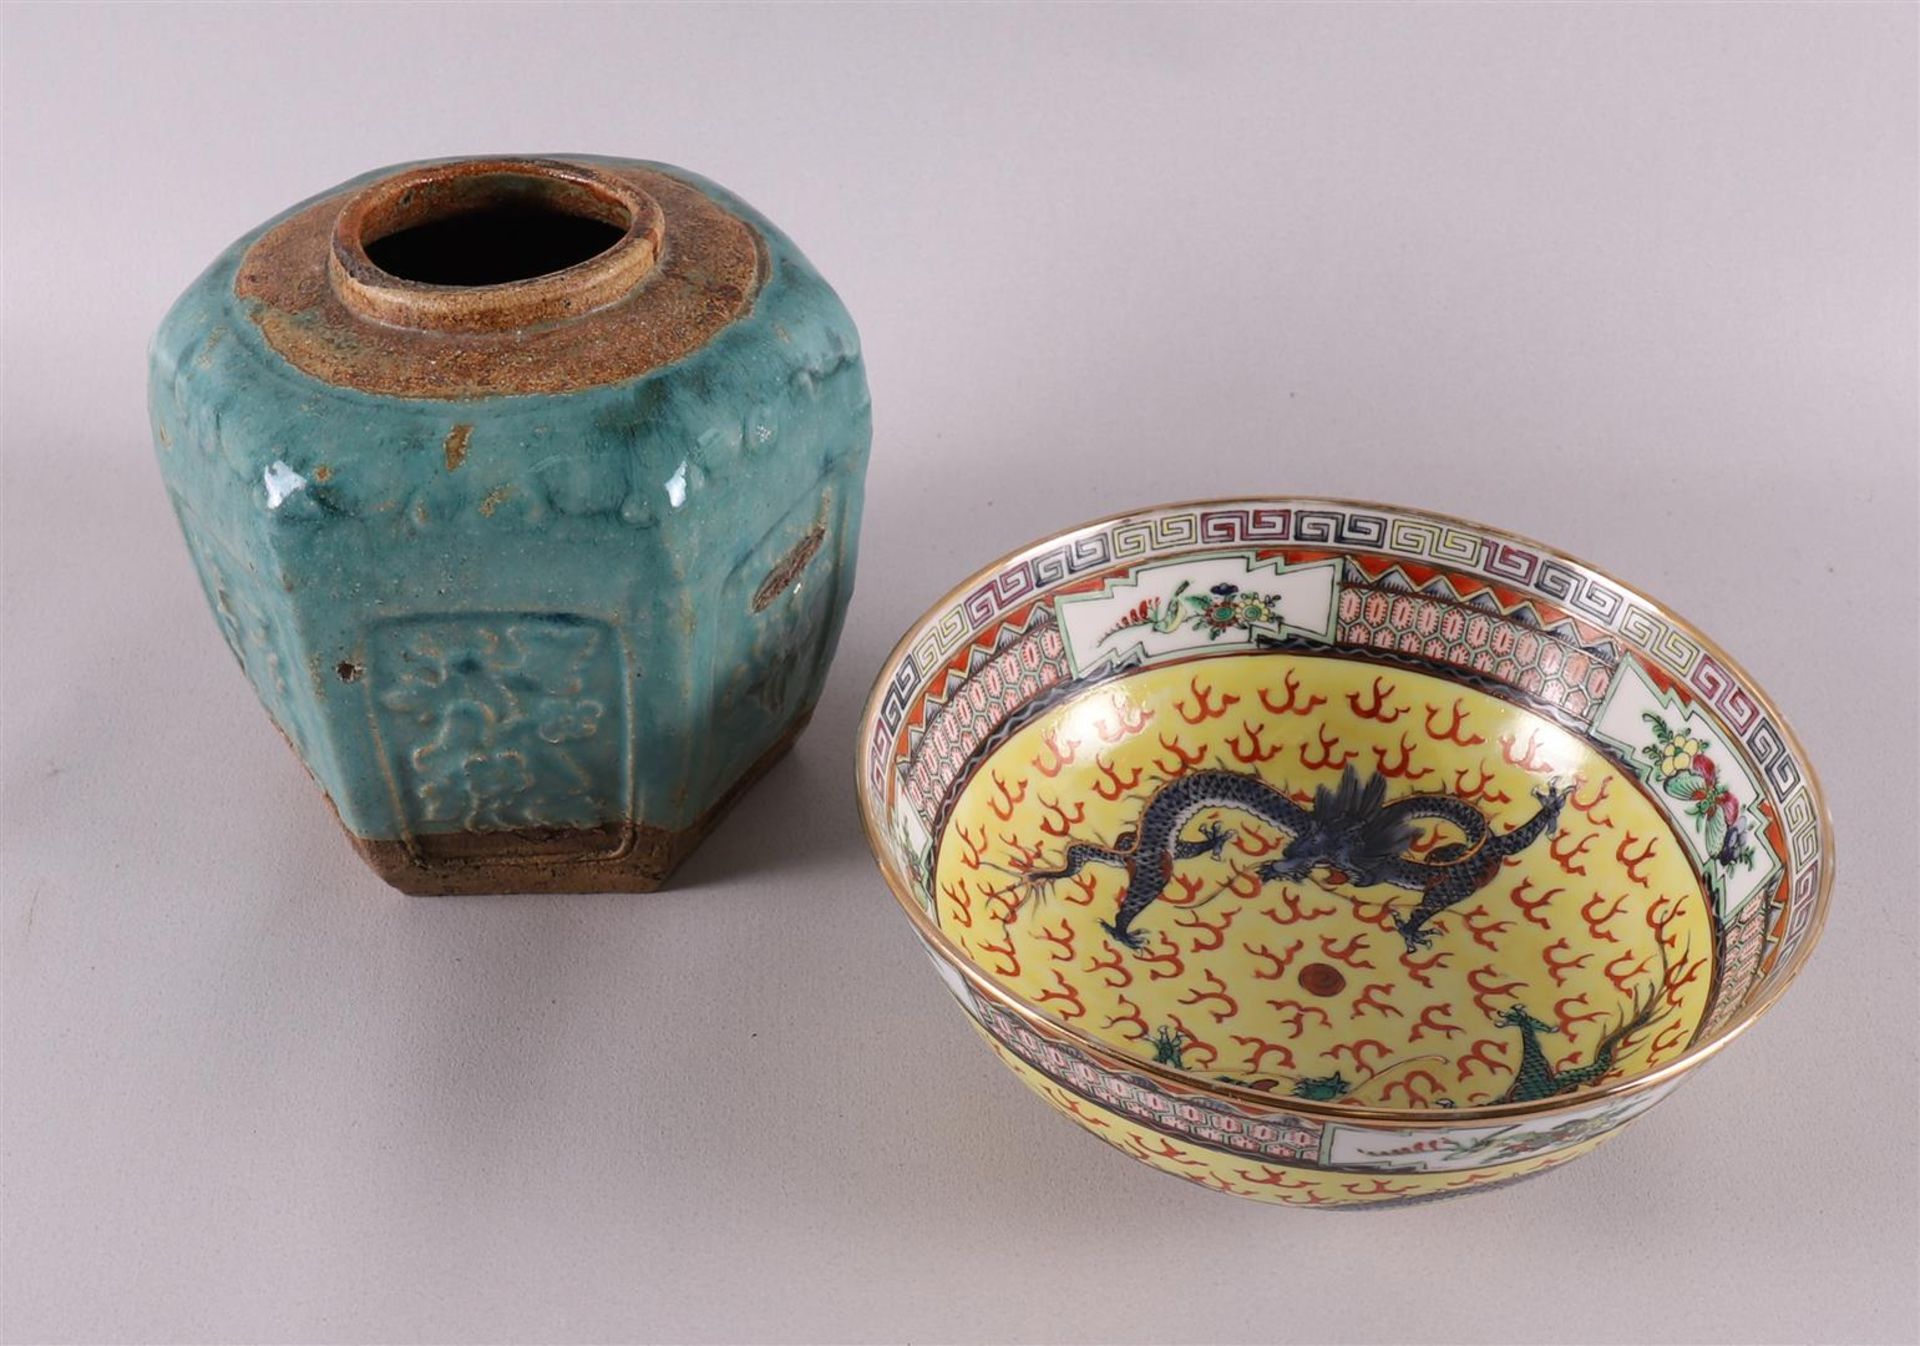 A porcelain bowl on a stand ring, China, 20th century. Polychrome decor of dragons, h 8 x Ø 20 cm.